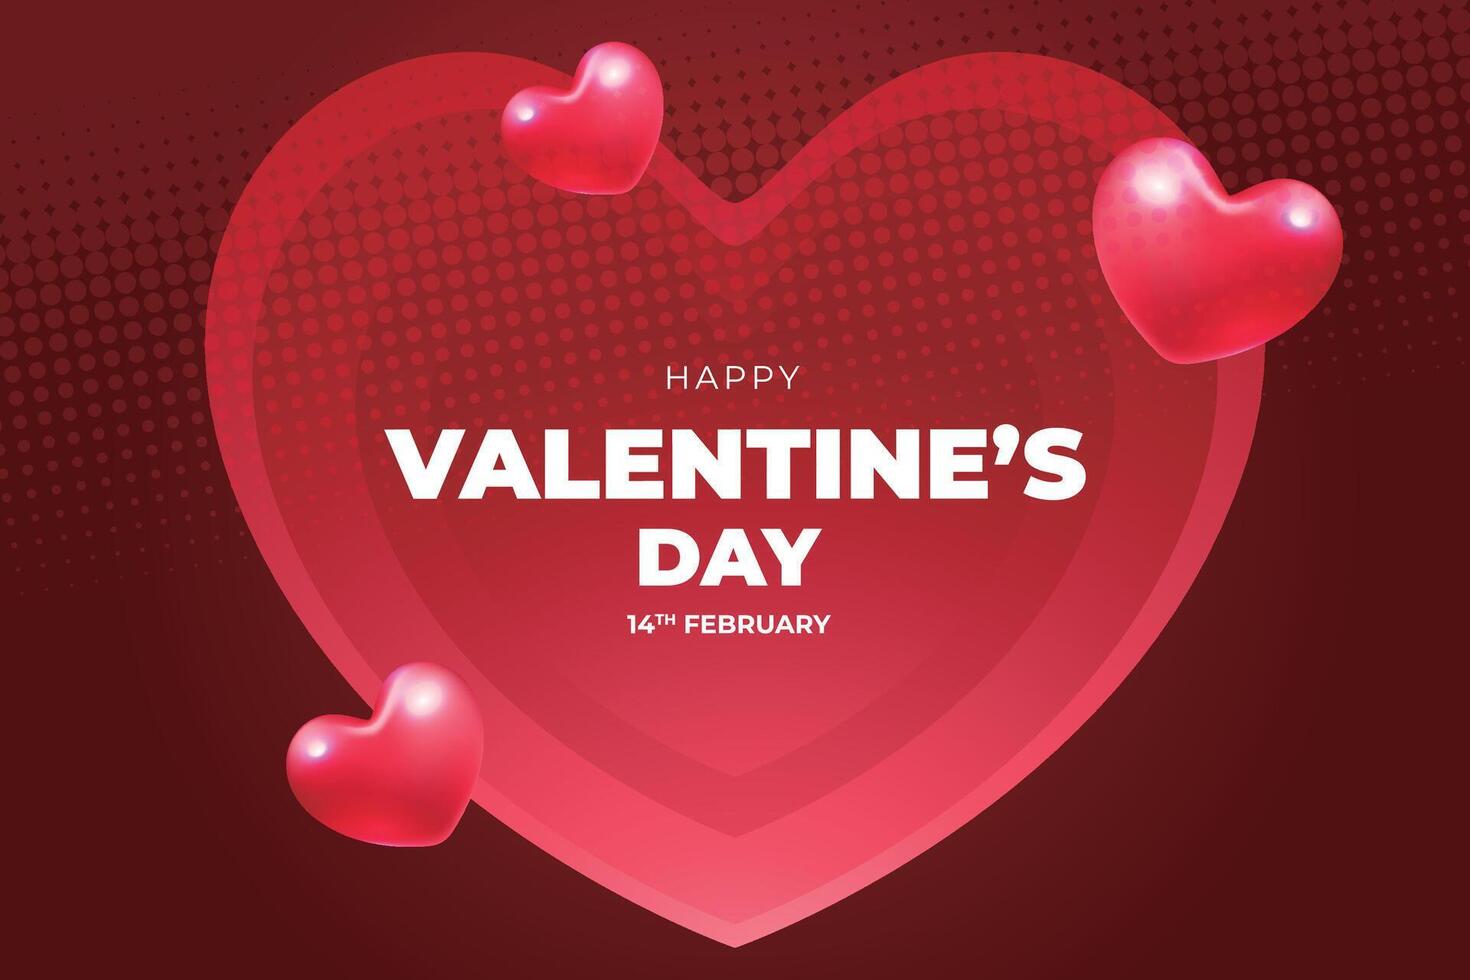 valentine's day background with red heart shaped balloons vector